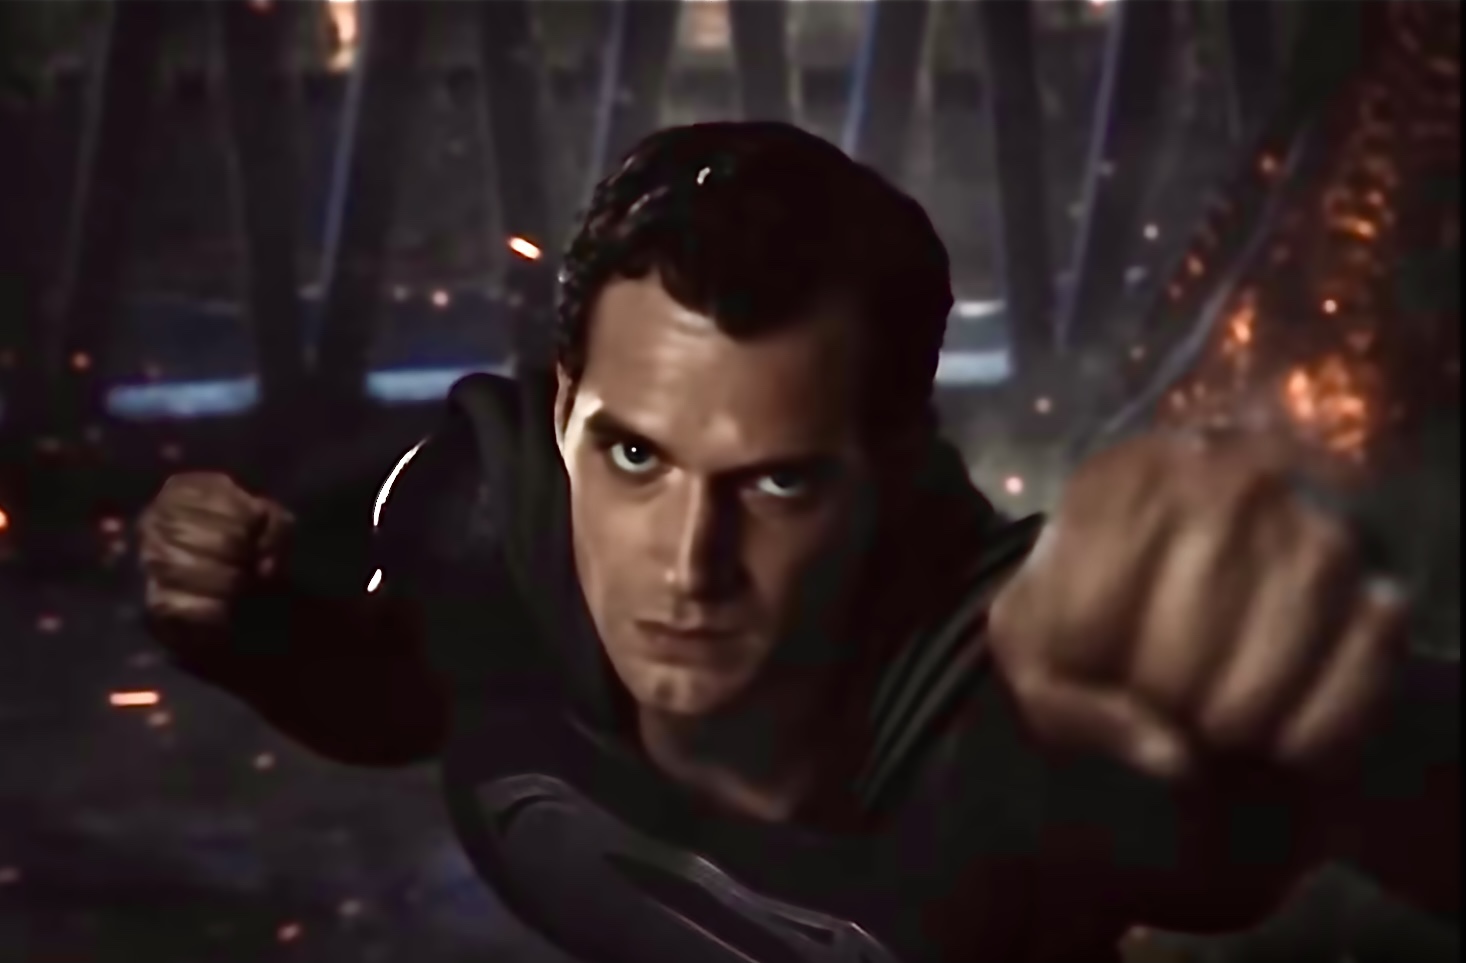 Superman Packs a punch - Zack Snyder's Justice League